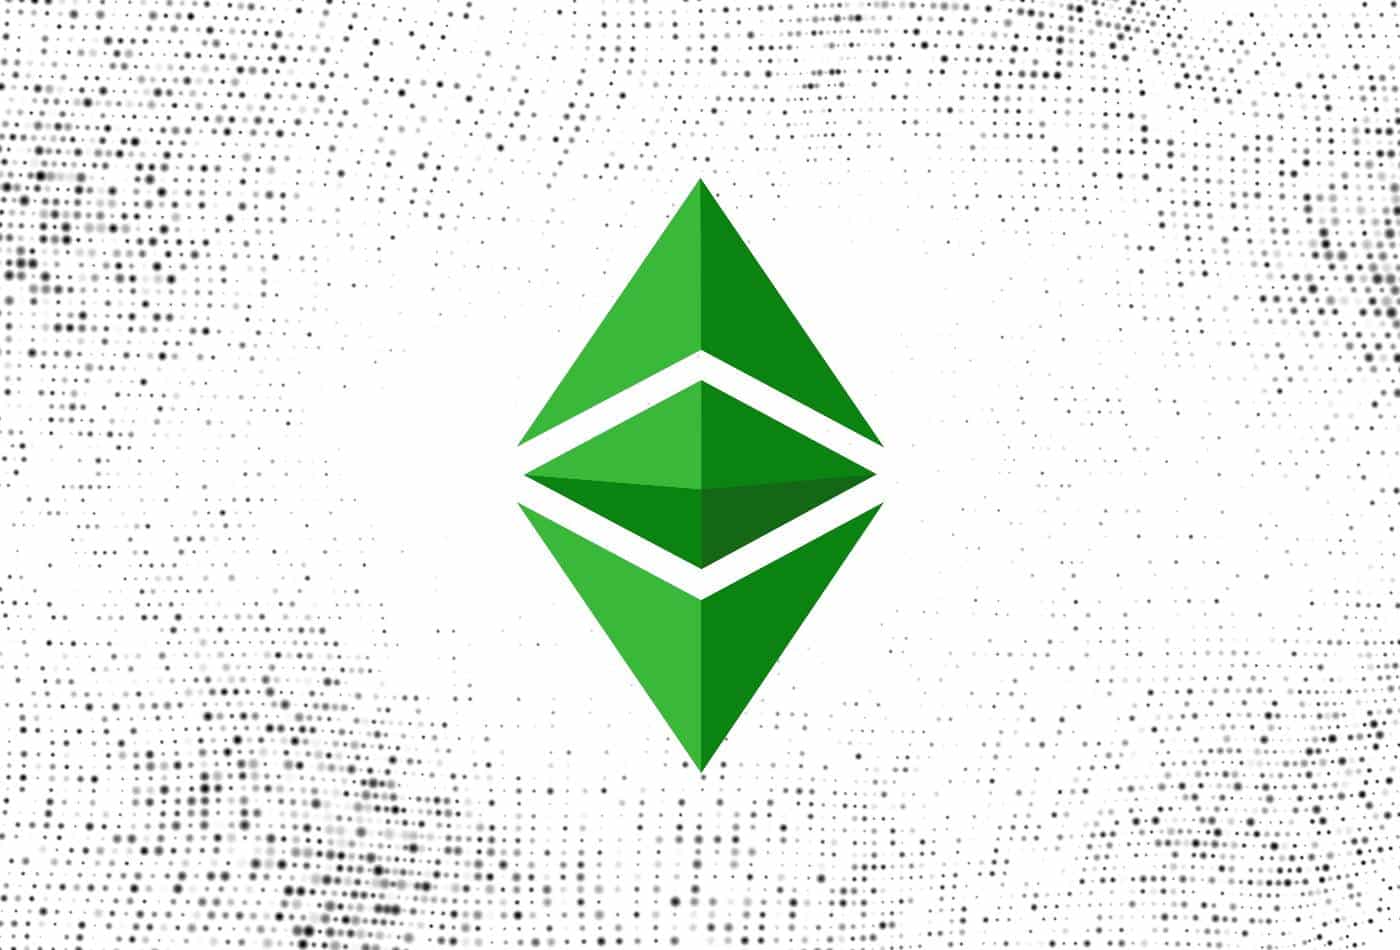 Ethereum Classic (ETC) Price Prediction 2022-2030: The Most Realistic Analysis